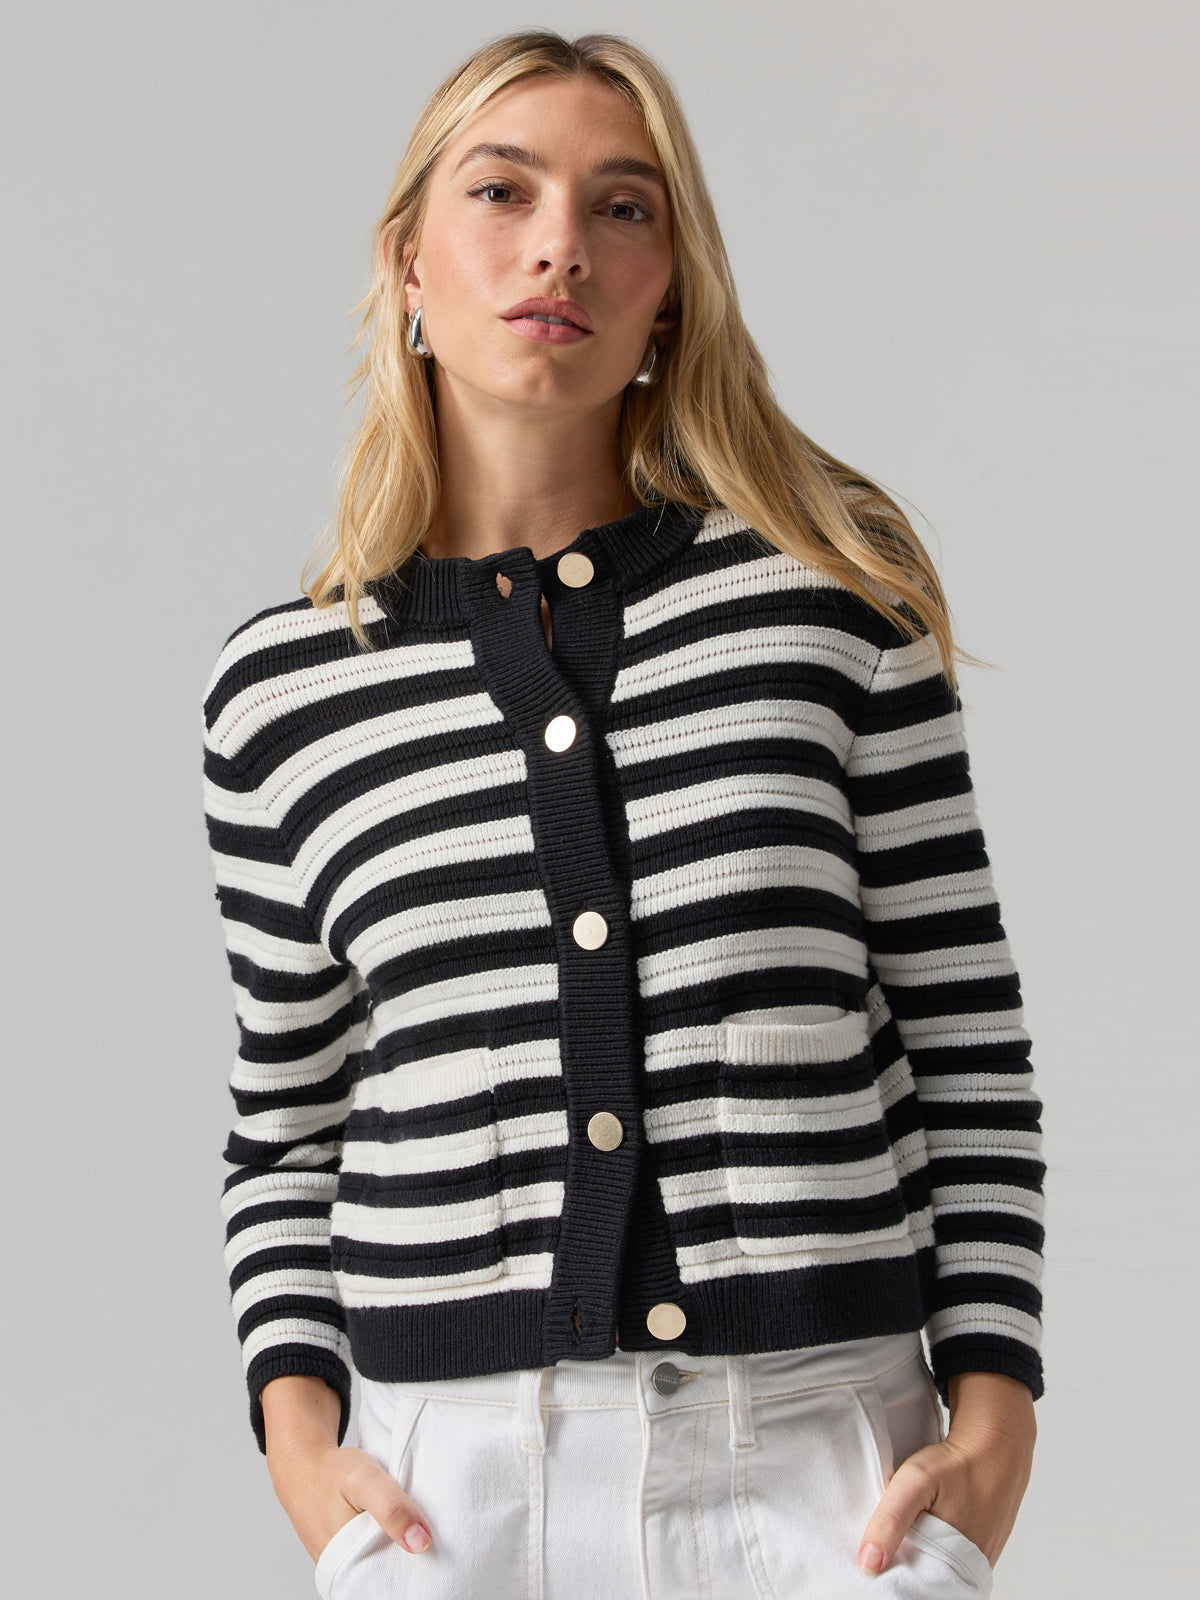 Knitted Sweater Jacket Chalk And Black Stripe